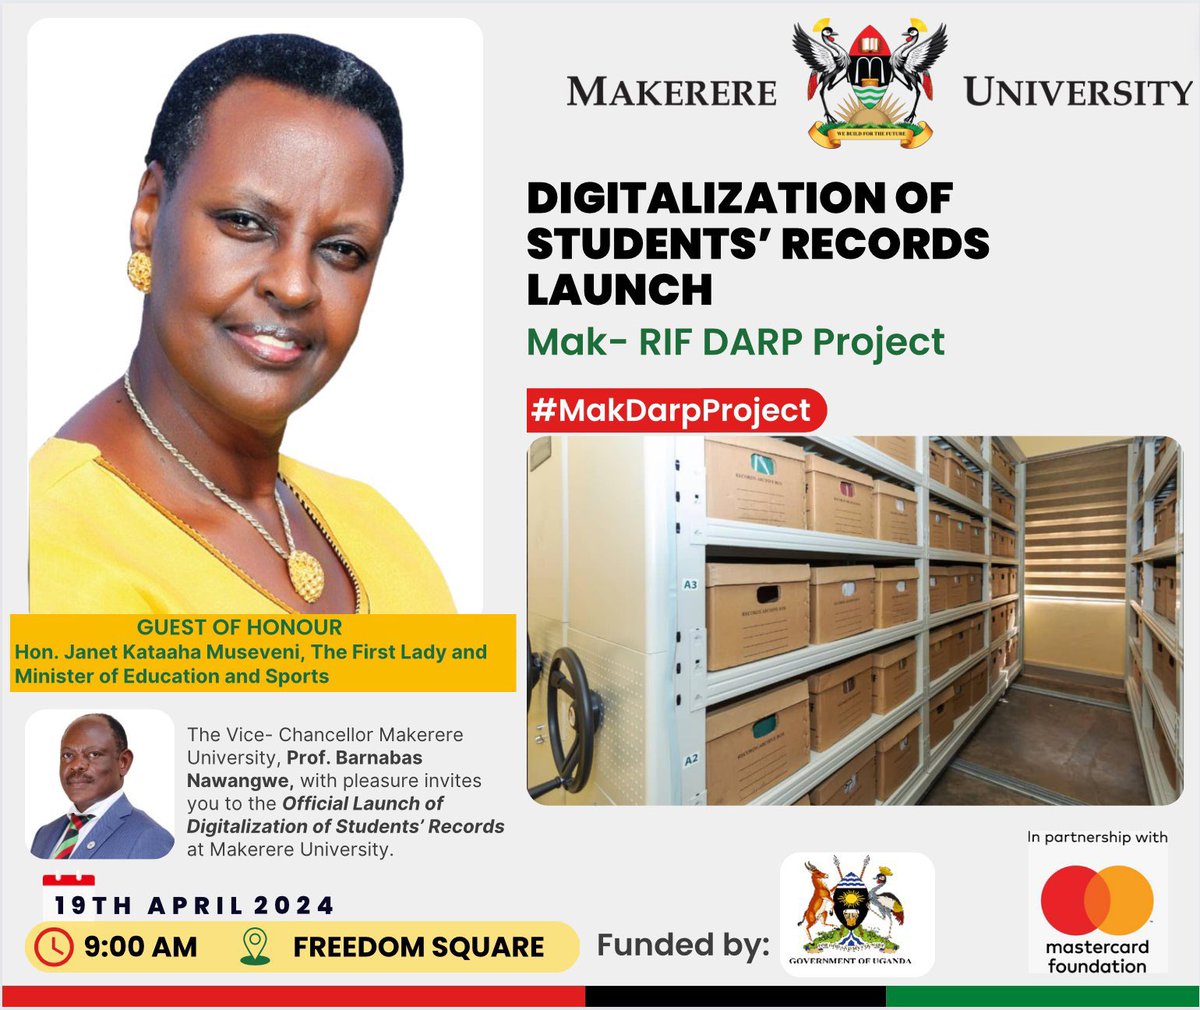 Tomorrow, @Makerere will officially transition from a paper filing system to a digitized system of storing students records. The minister of @Educ_SportsUg Hon. @JanetMuseveni will officially launch the project. Most welcome Mama🙏🏽 #MakDarpProject